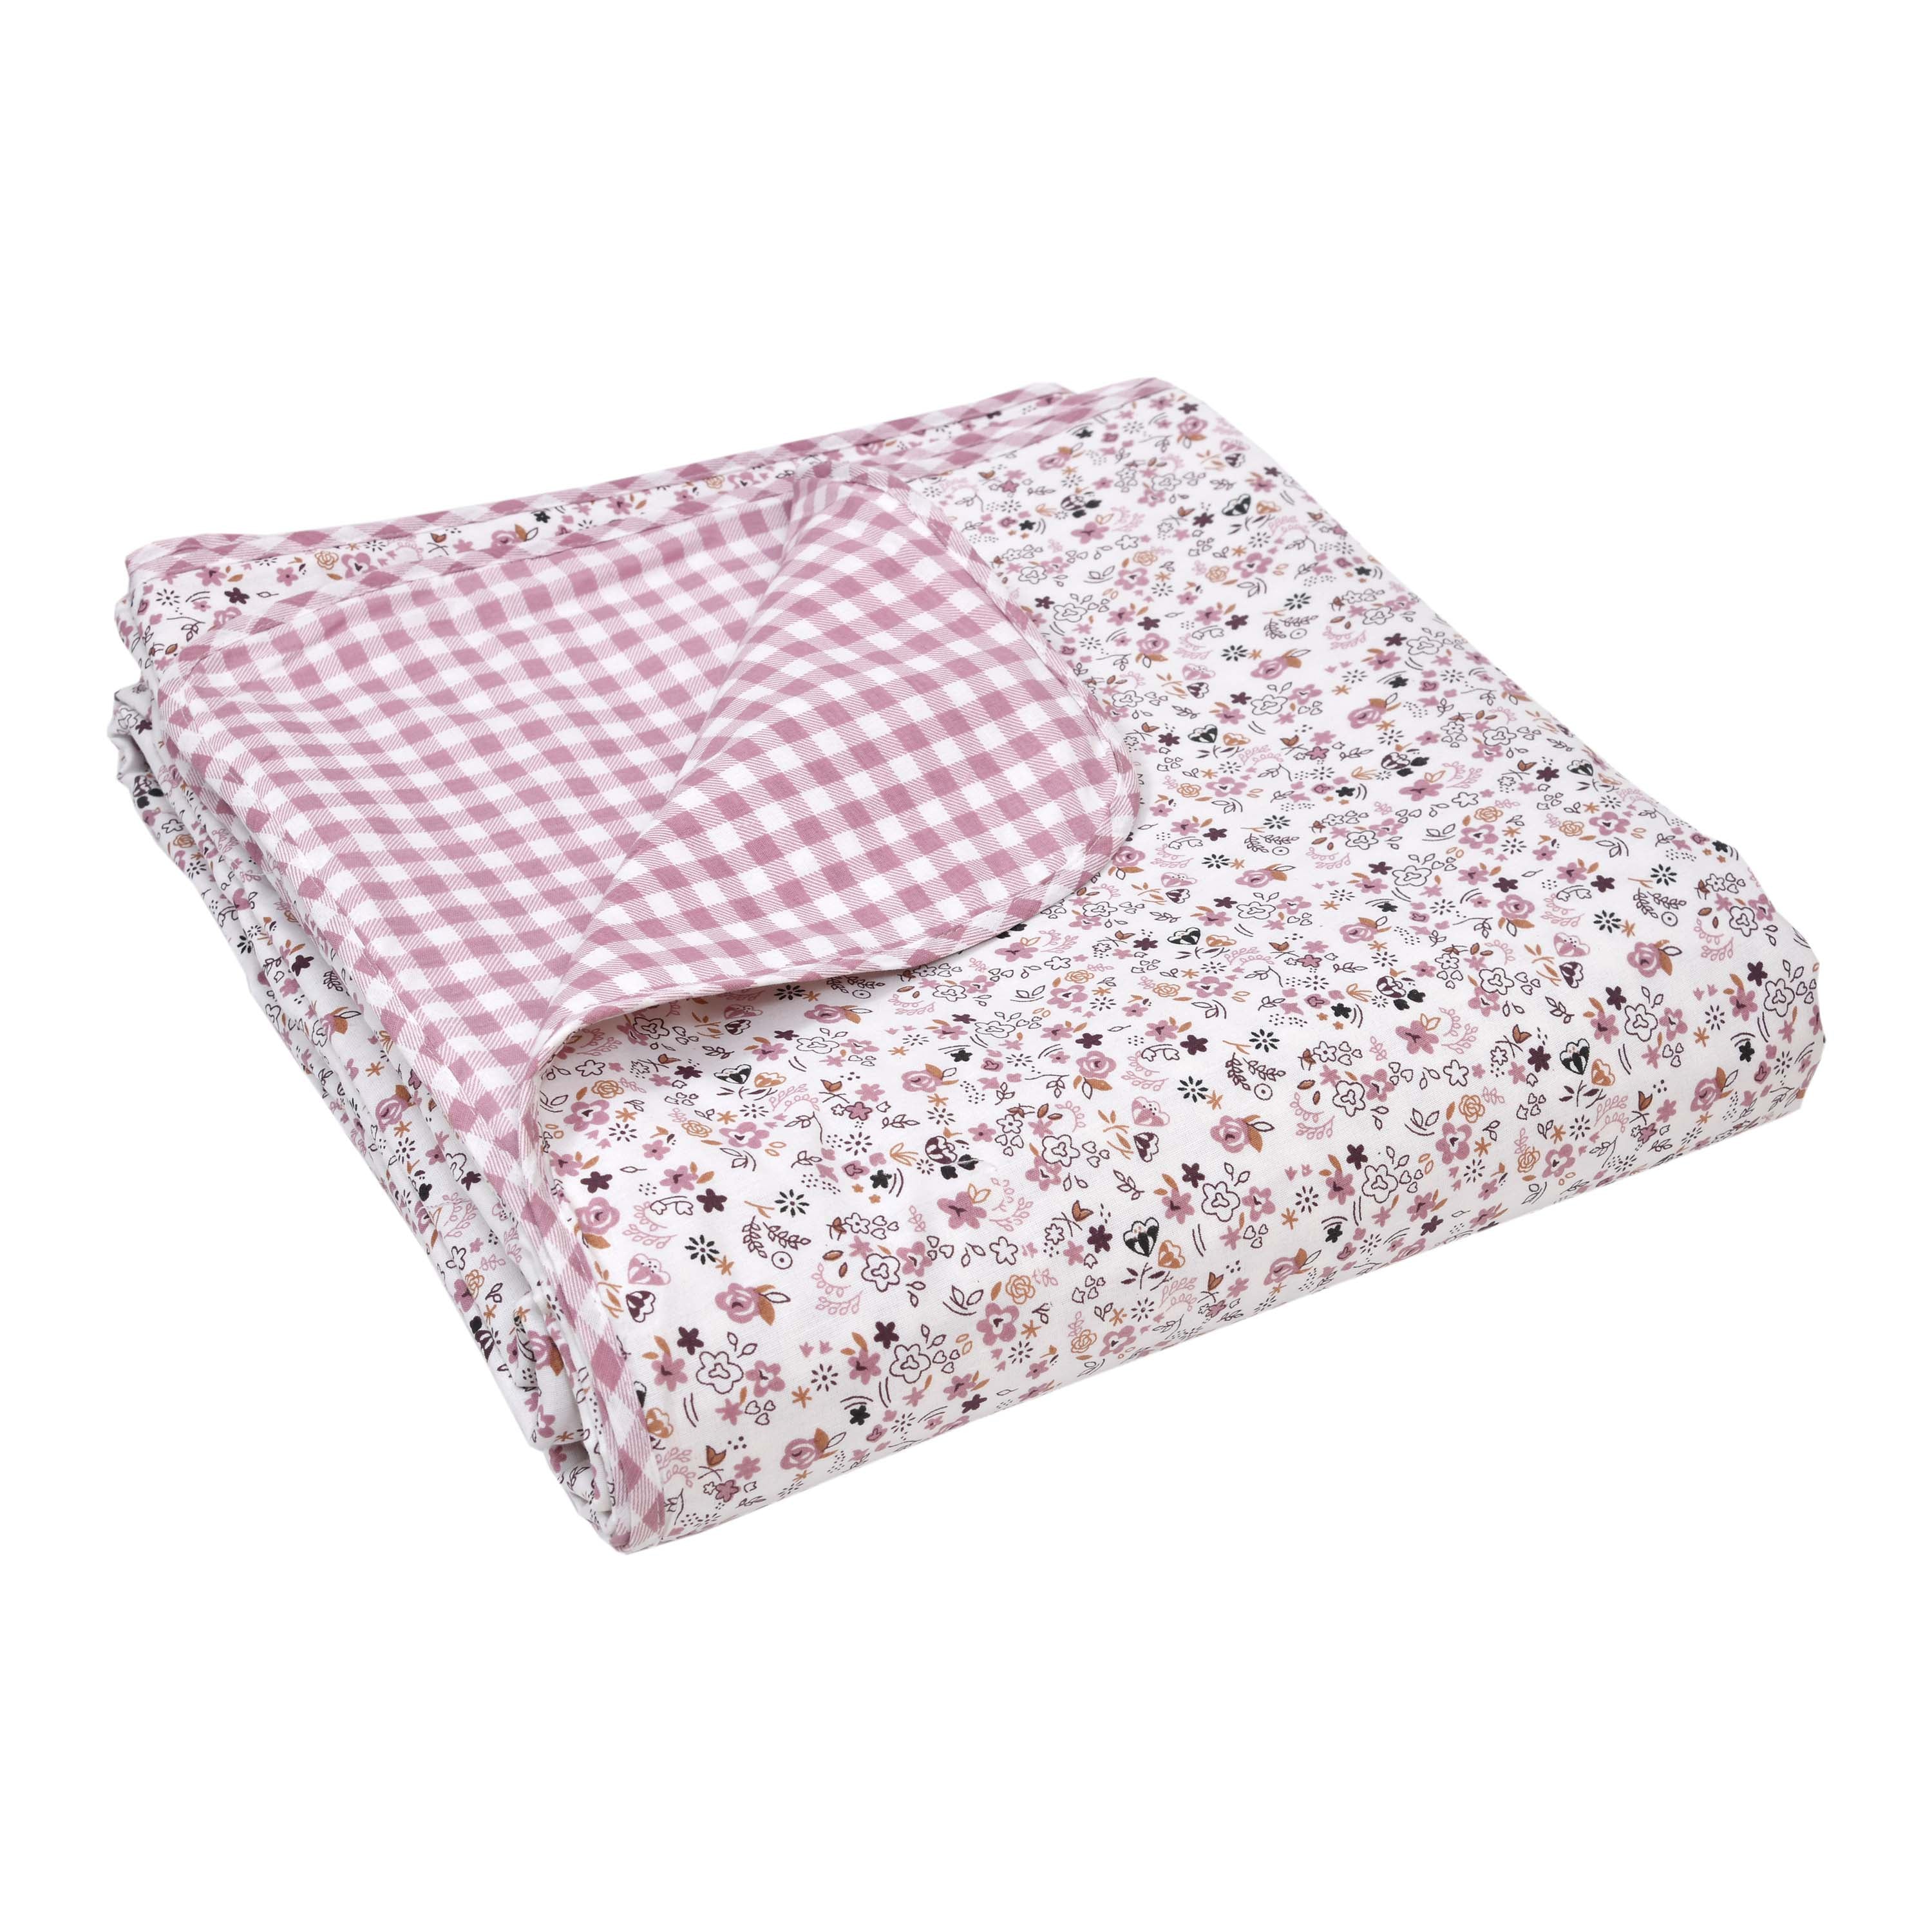 Dohar Cotton-Double Bed- Muddy Pink Small Print